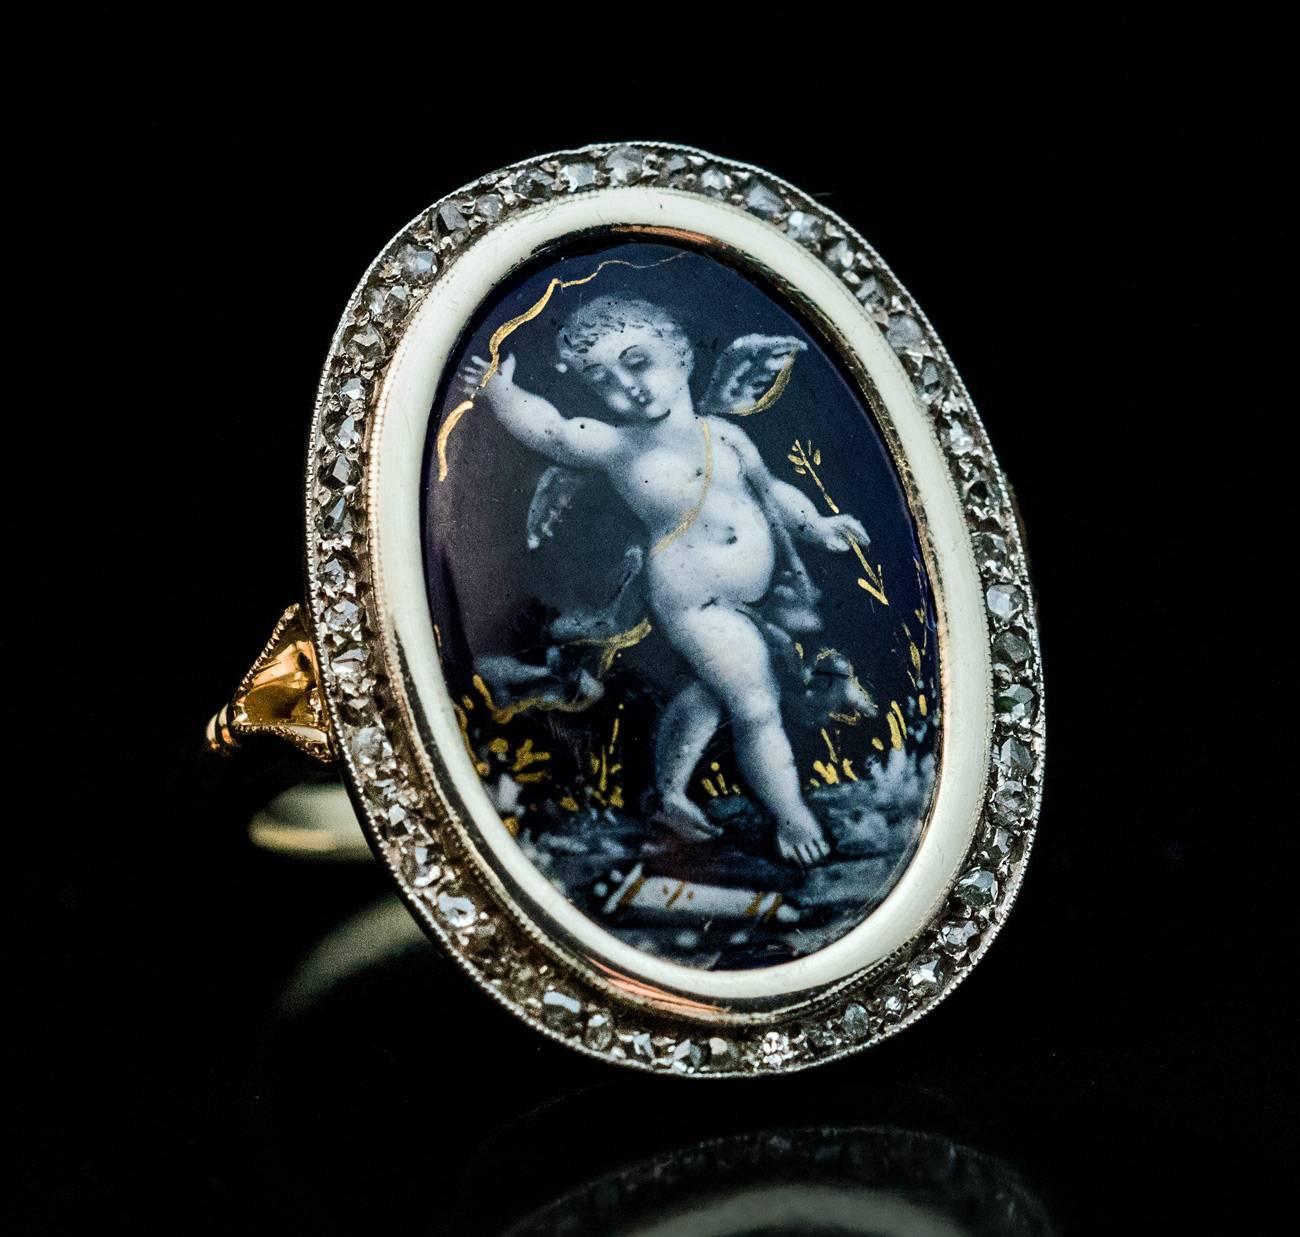 A Victorian era silver topped gold ring features a Renaissance style French Limoges enamel miniature of Eros / Cupid, the Greco-Roman god of erotic love, desire and affection, finely painted in white & gray enamels on a cobalt blue ground with gold